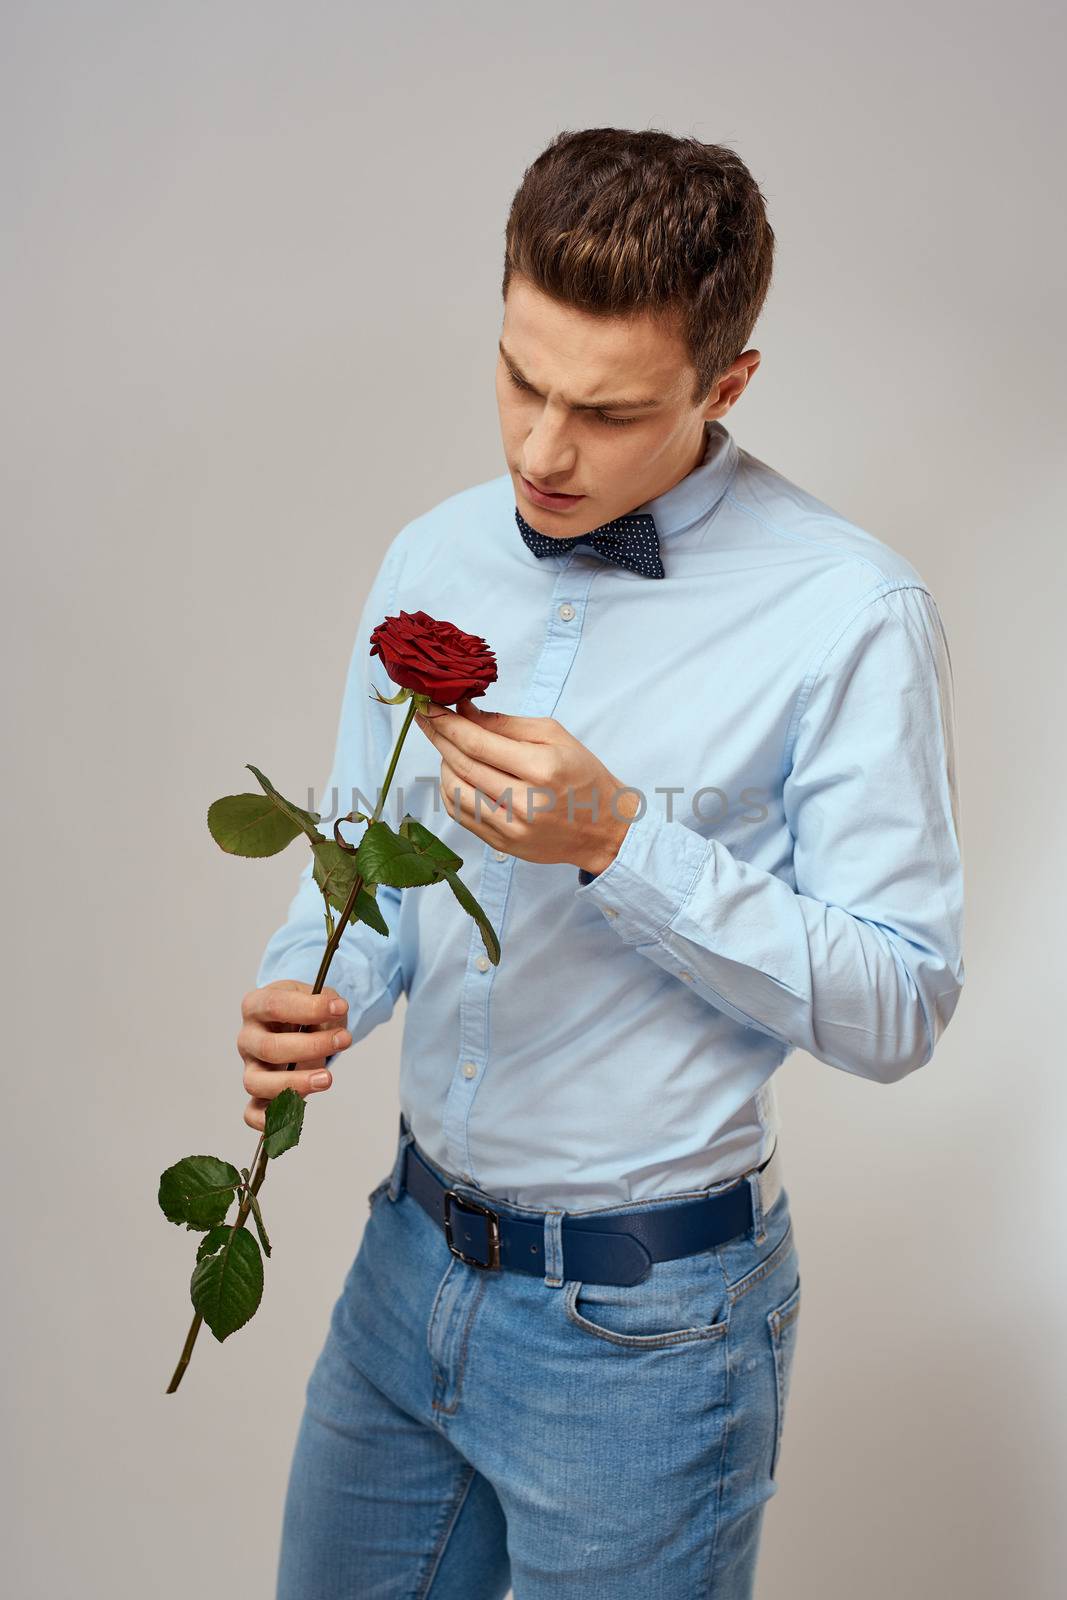 Romantic man with a red rose and in a blue shirt with a bow tie around his neck gray background by SHOTPRIME